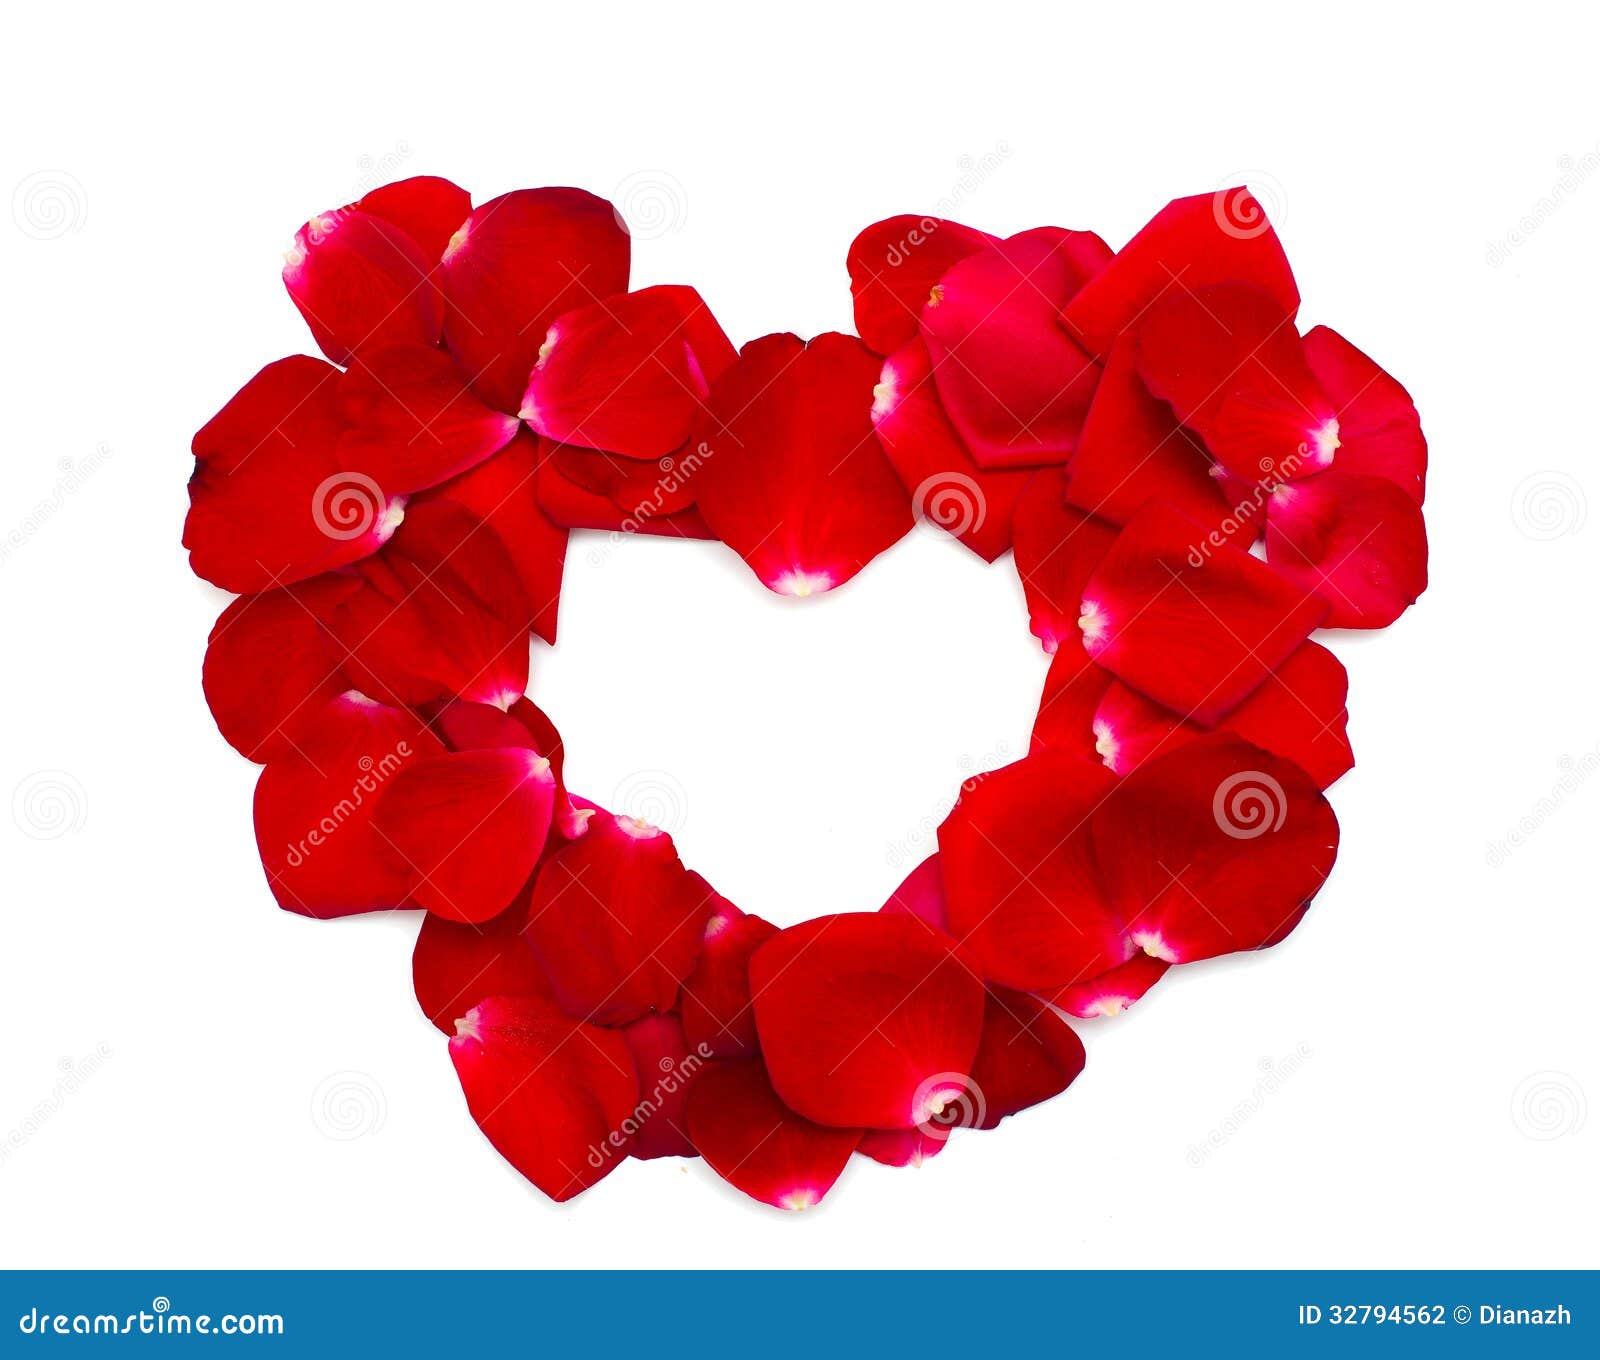 Heart Made of Red Rose Petals Stock Photo - Image of lover, ornament ...